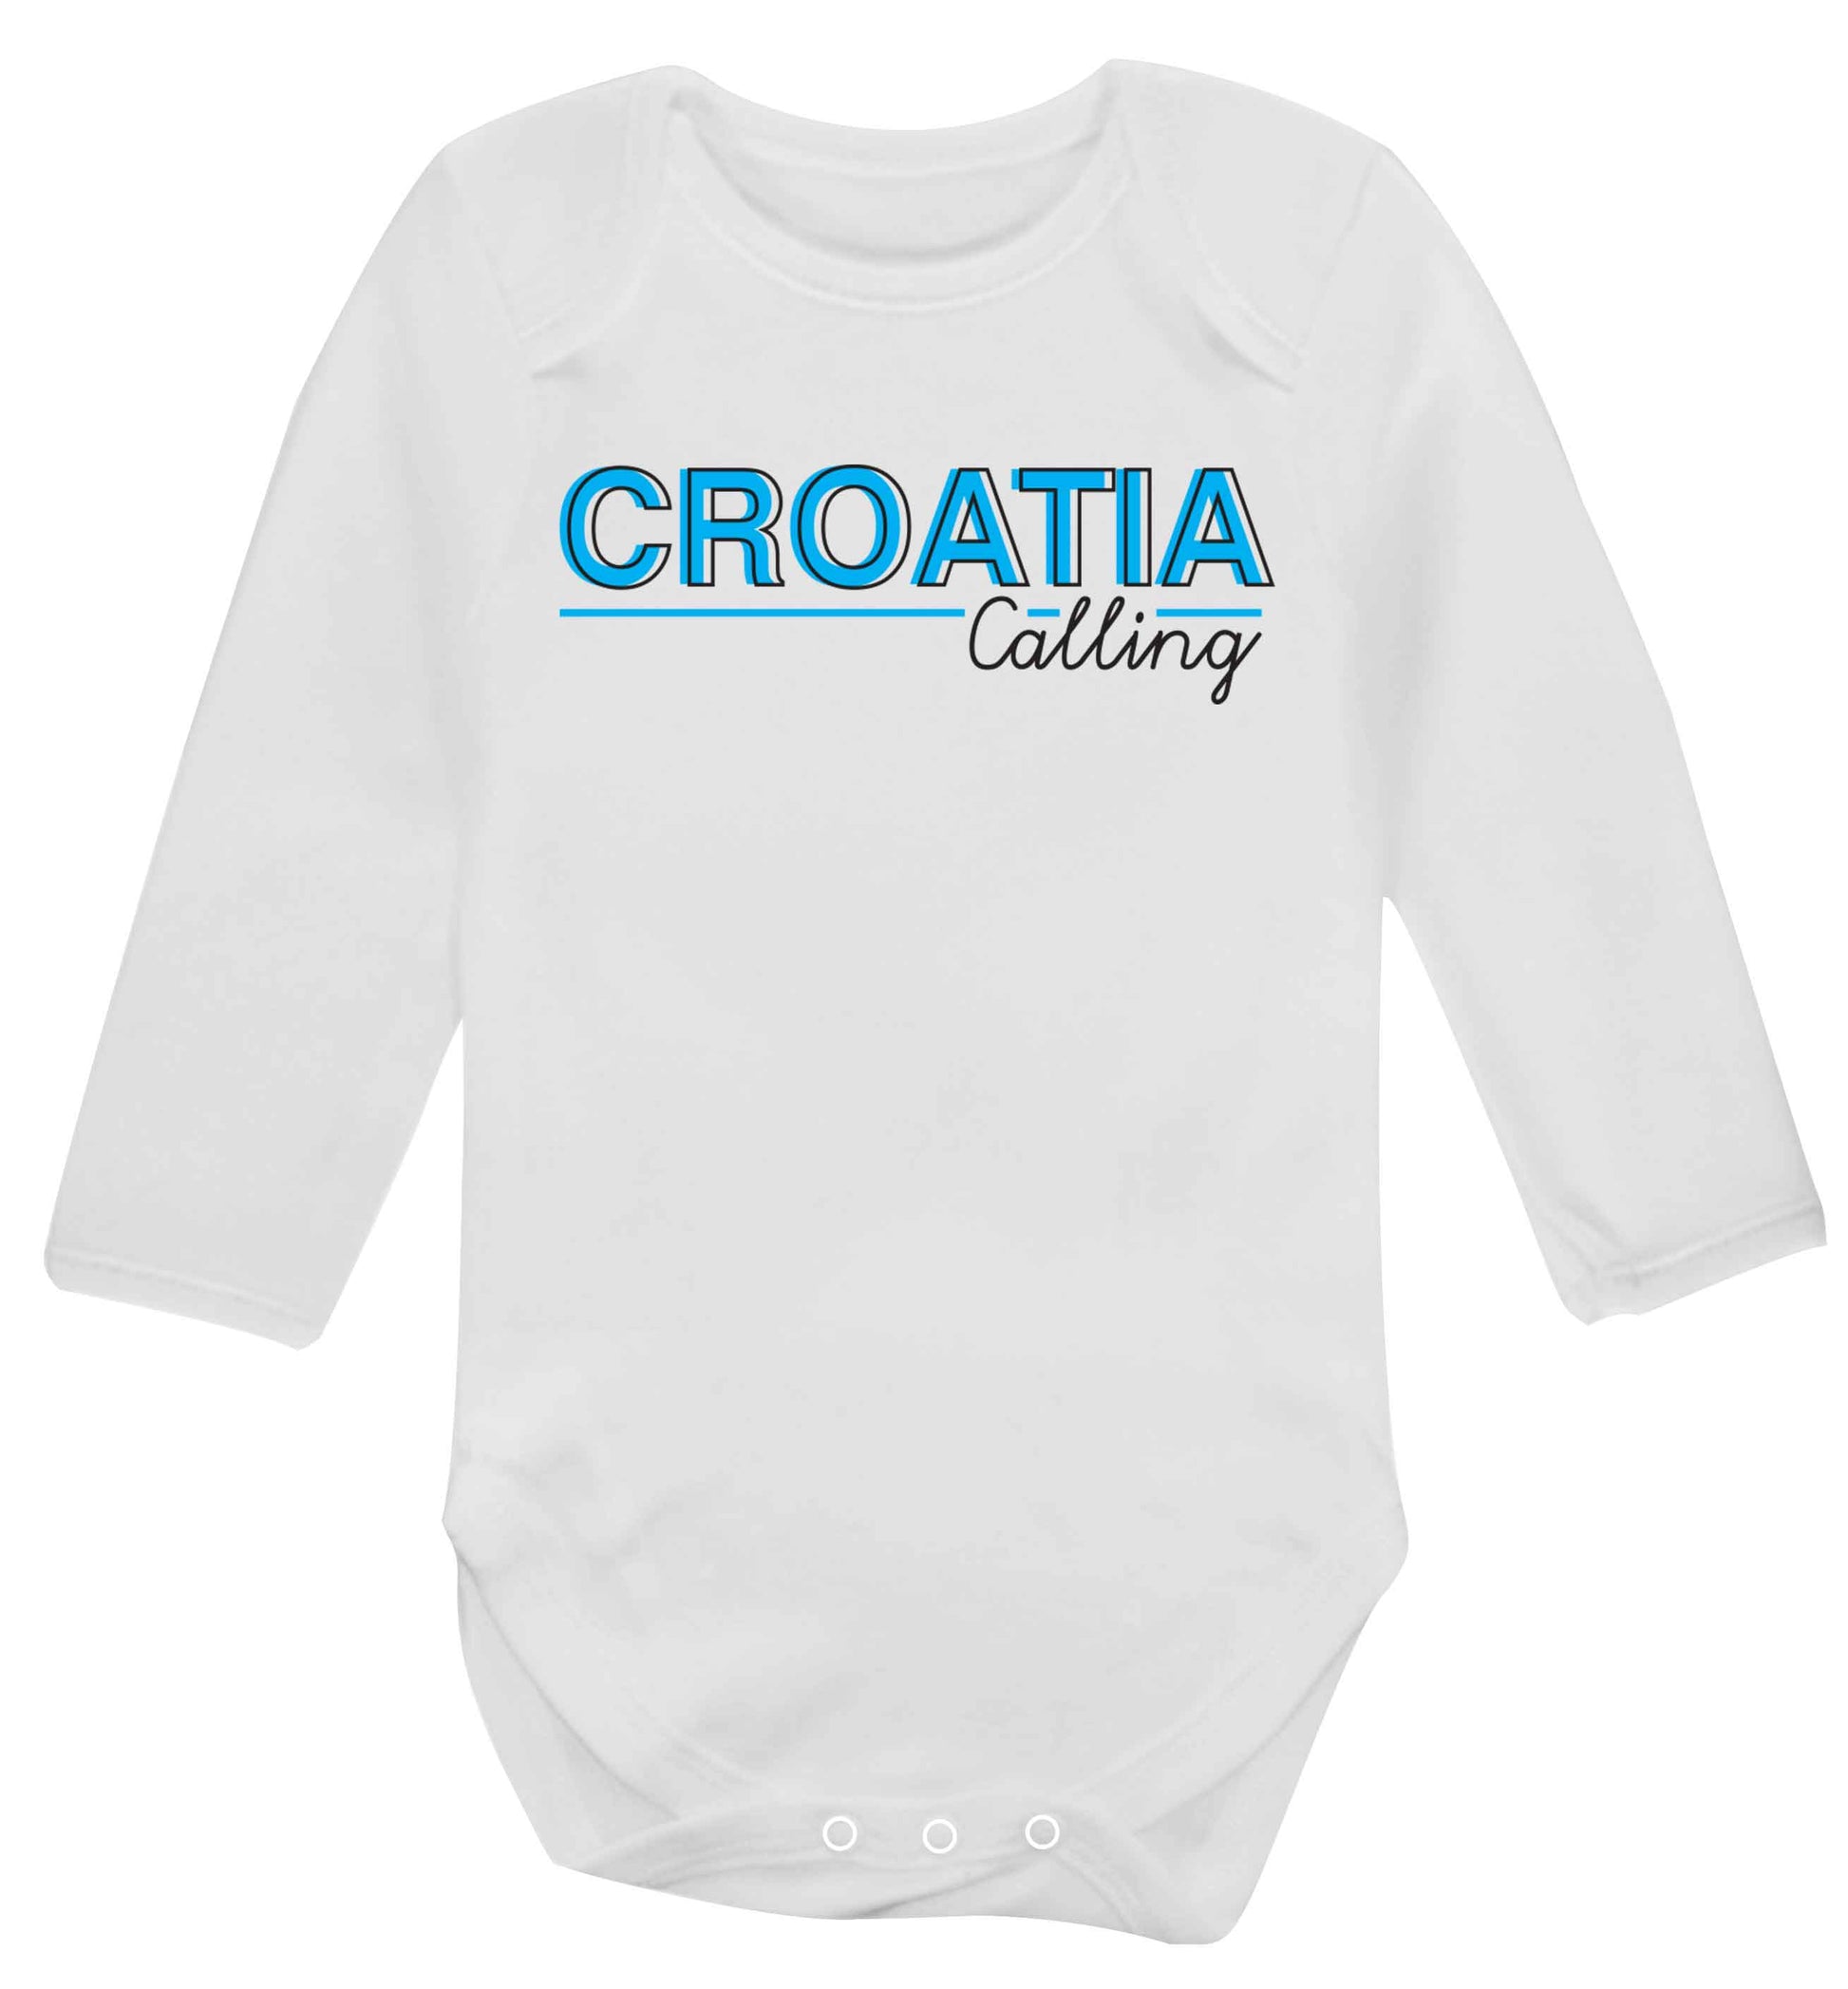 Croatia calling Baby Vest long sleeved white 6-12 months